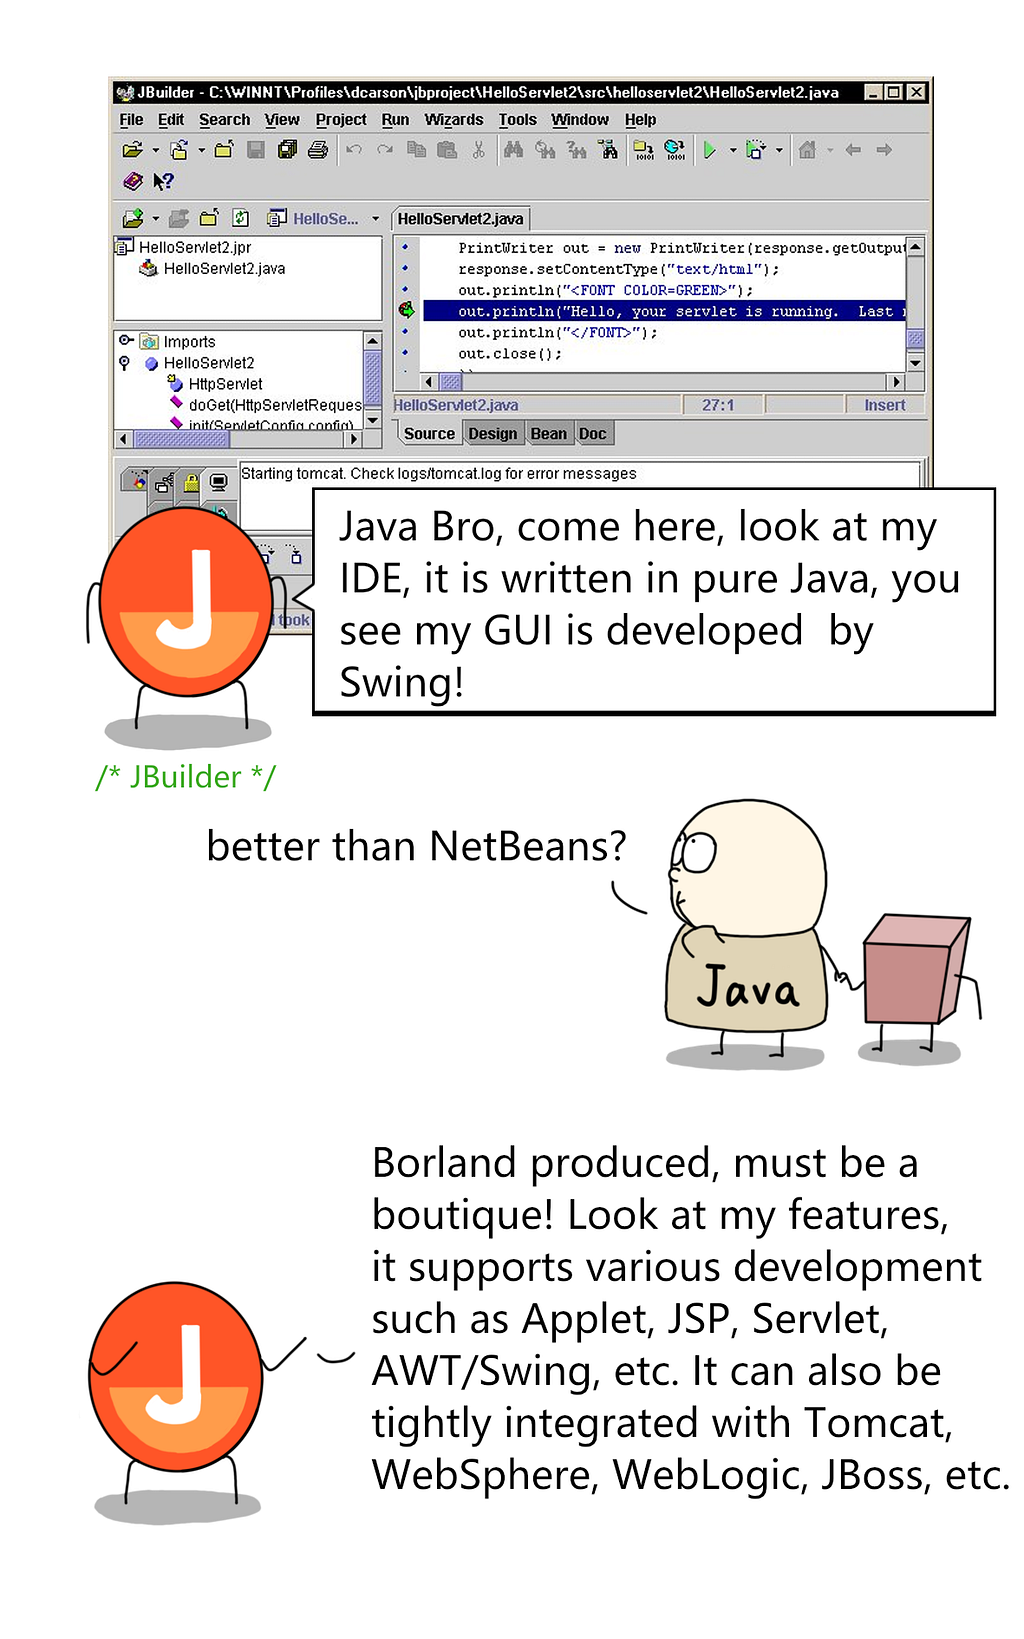 JBuilder — Java bro, come here. My IDE is written in pure Java, and my gui is developed in swing.
 
 Java — better than netbeans?
 
 jbuilder- look at my features. i support various development such as applet, jsp, ,servlet, awt/swing, etc. and i can integrate with tomcat, websphere, weblogic, jboss, etc.